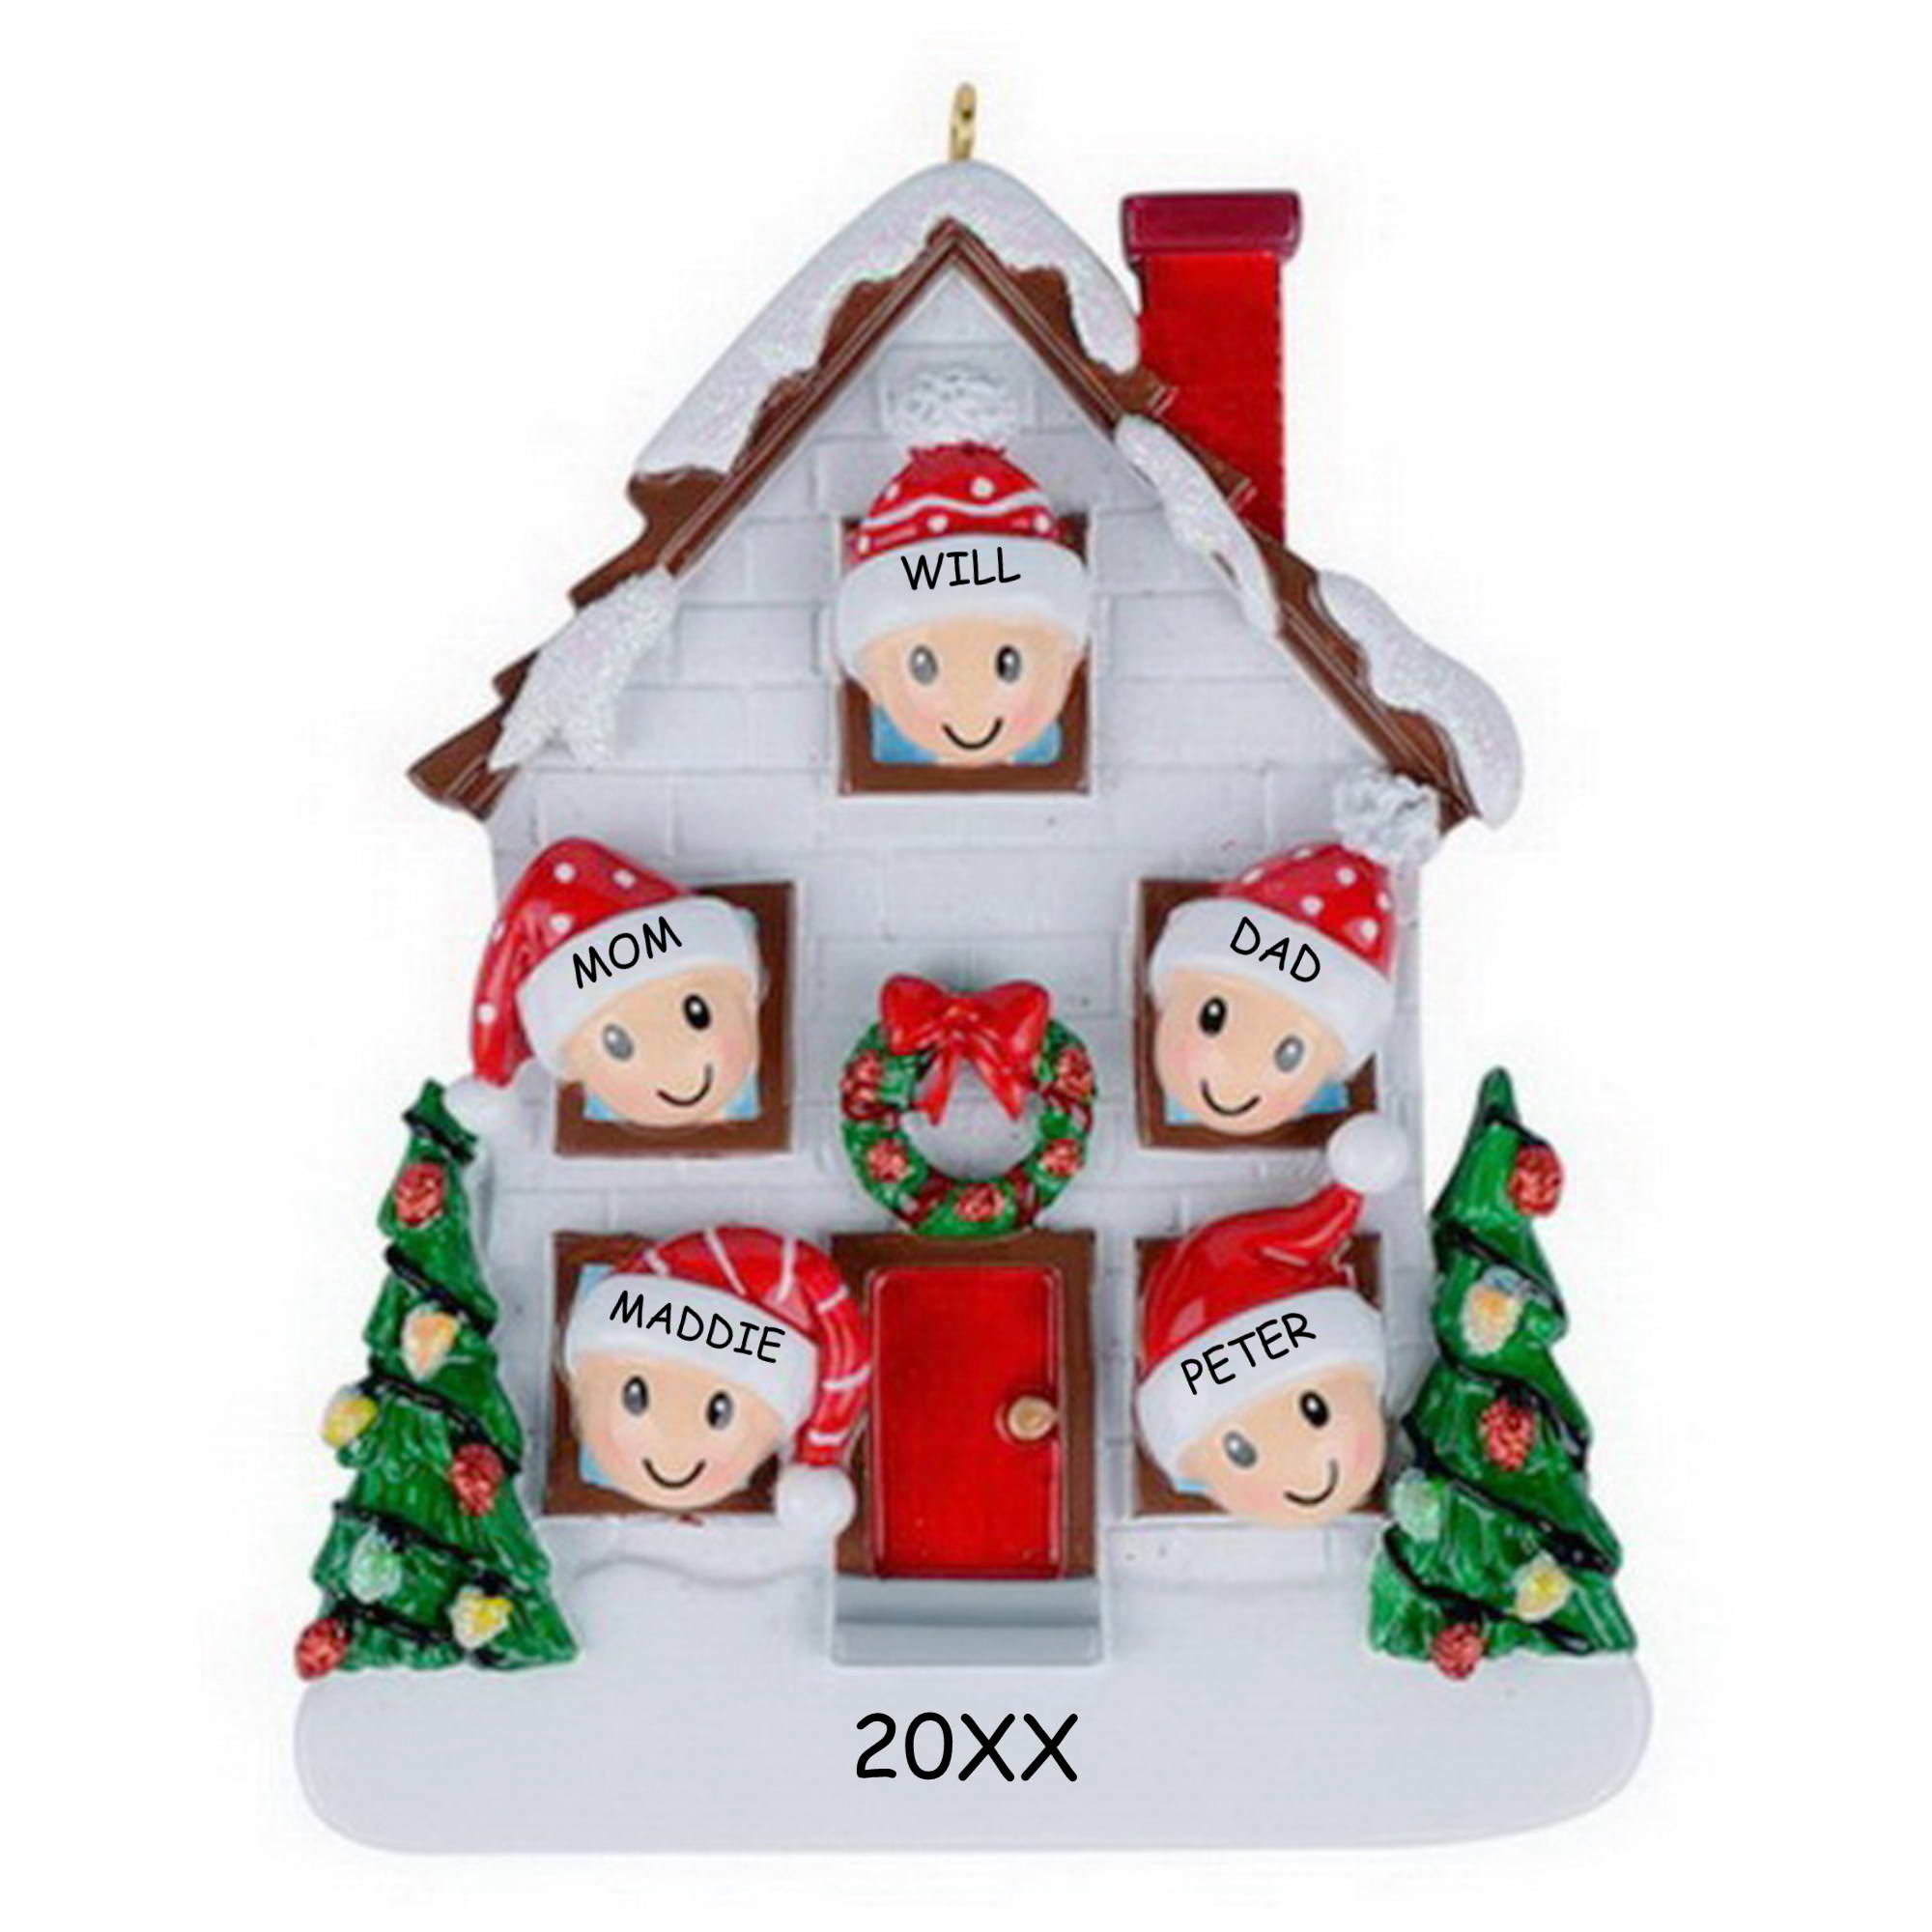 Personalized Home For Christmas Family Ornament - Family of 5